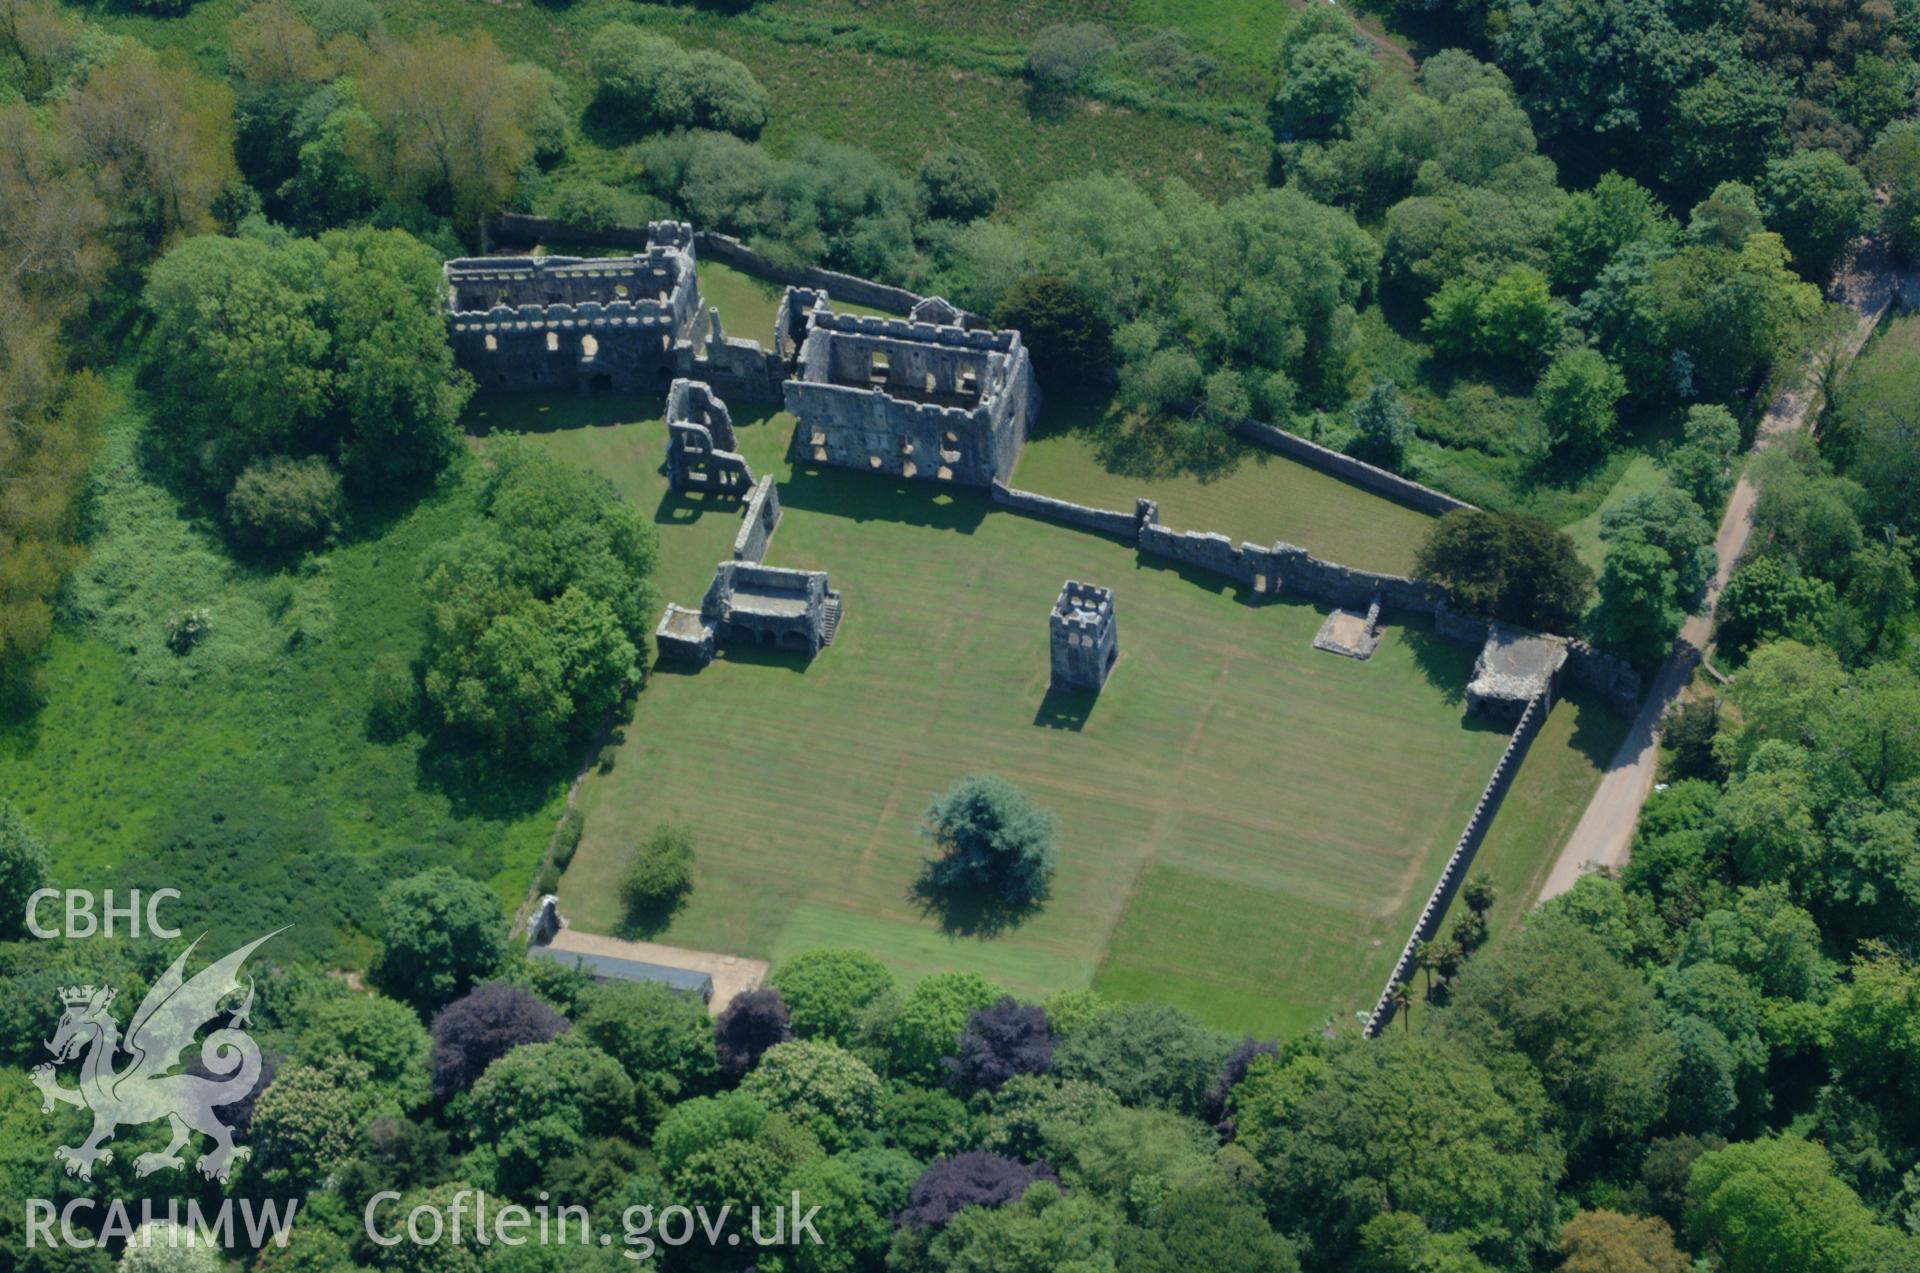 RCAHMW colour oblique aerial photograph of Lamphey Palace taken on 24/05/2004 by Toby Driver